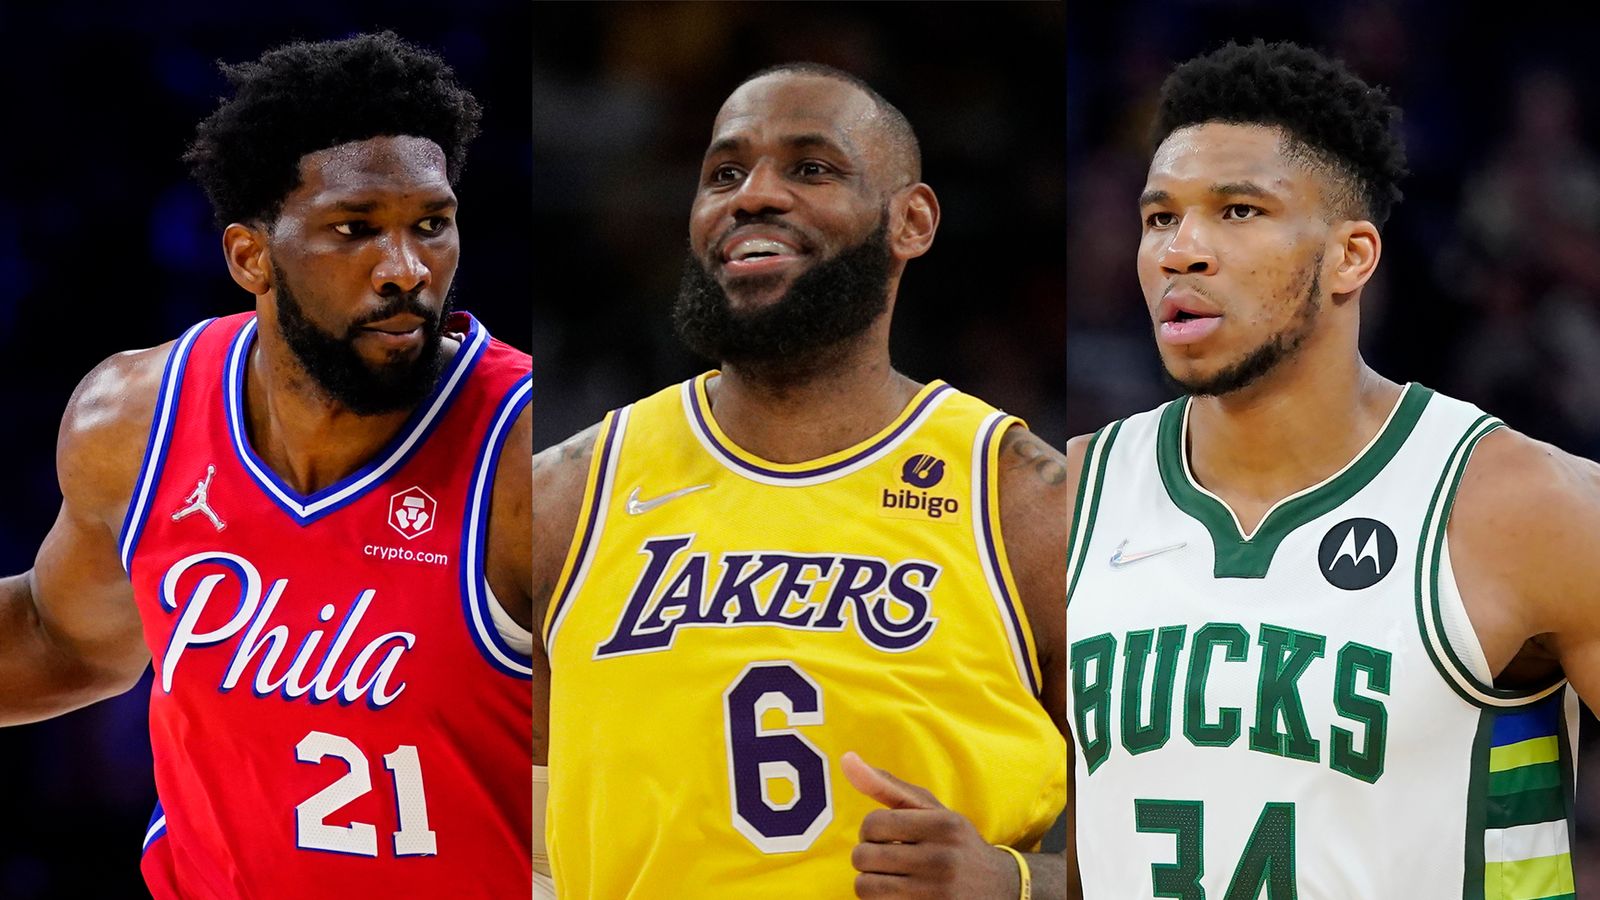 The major move Warriors needed to make in 2022 NBA offseason